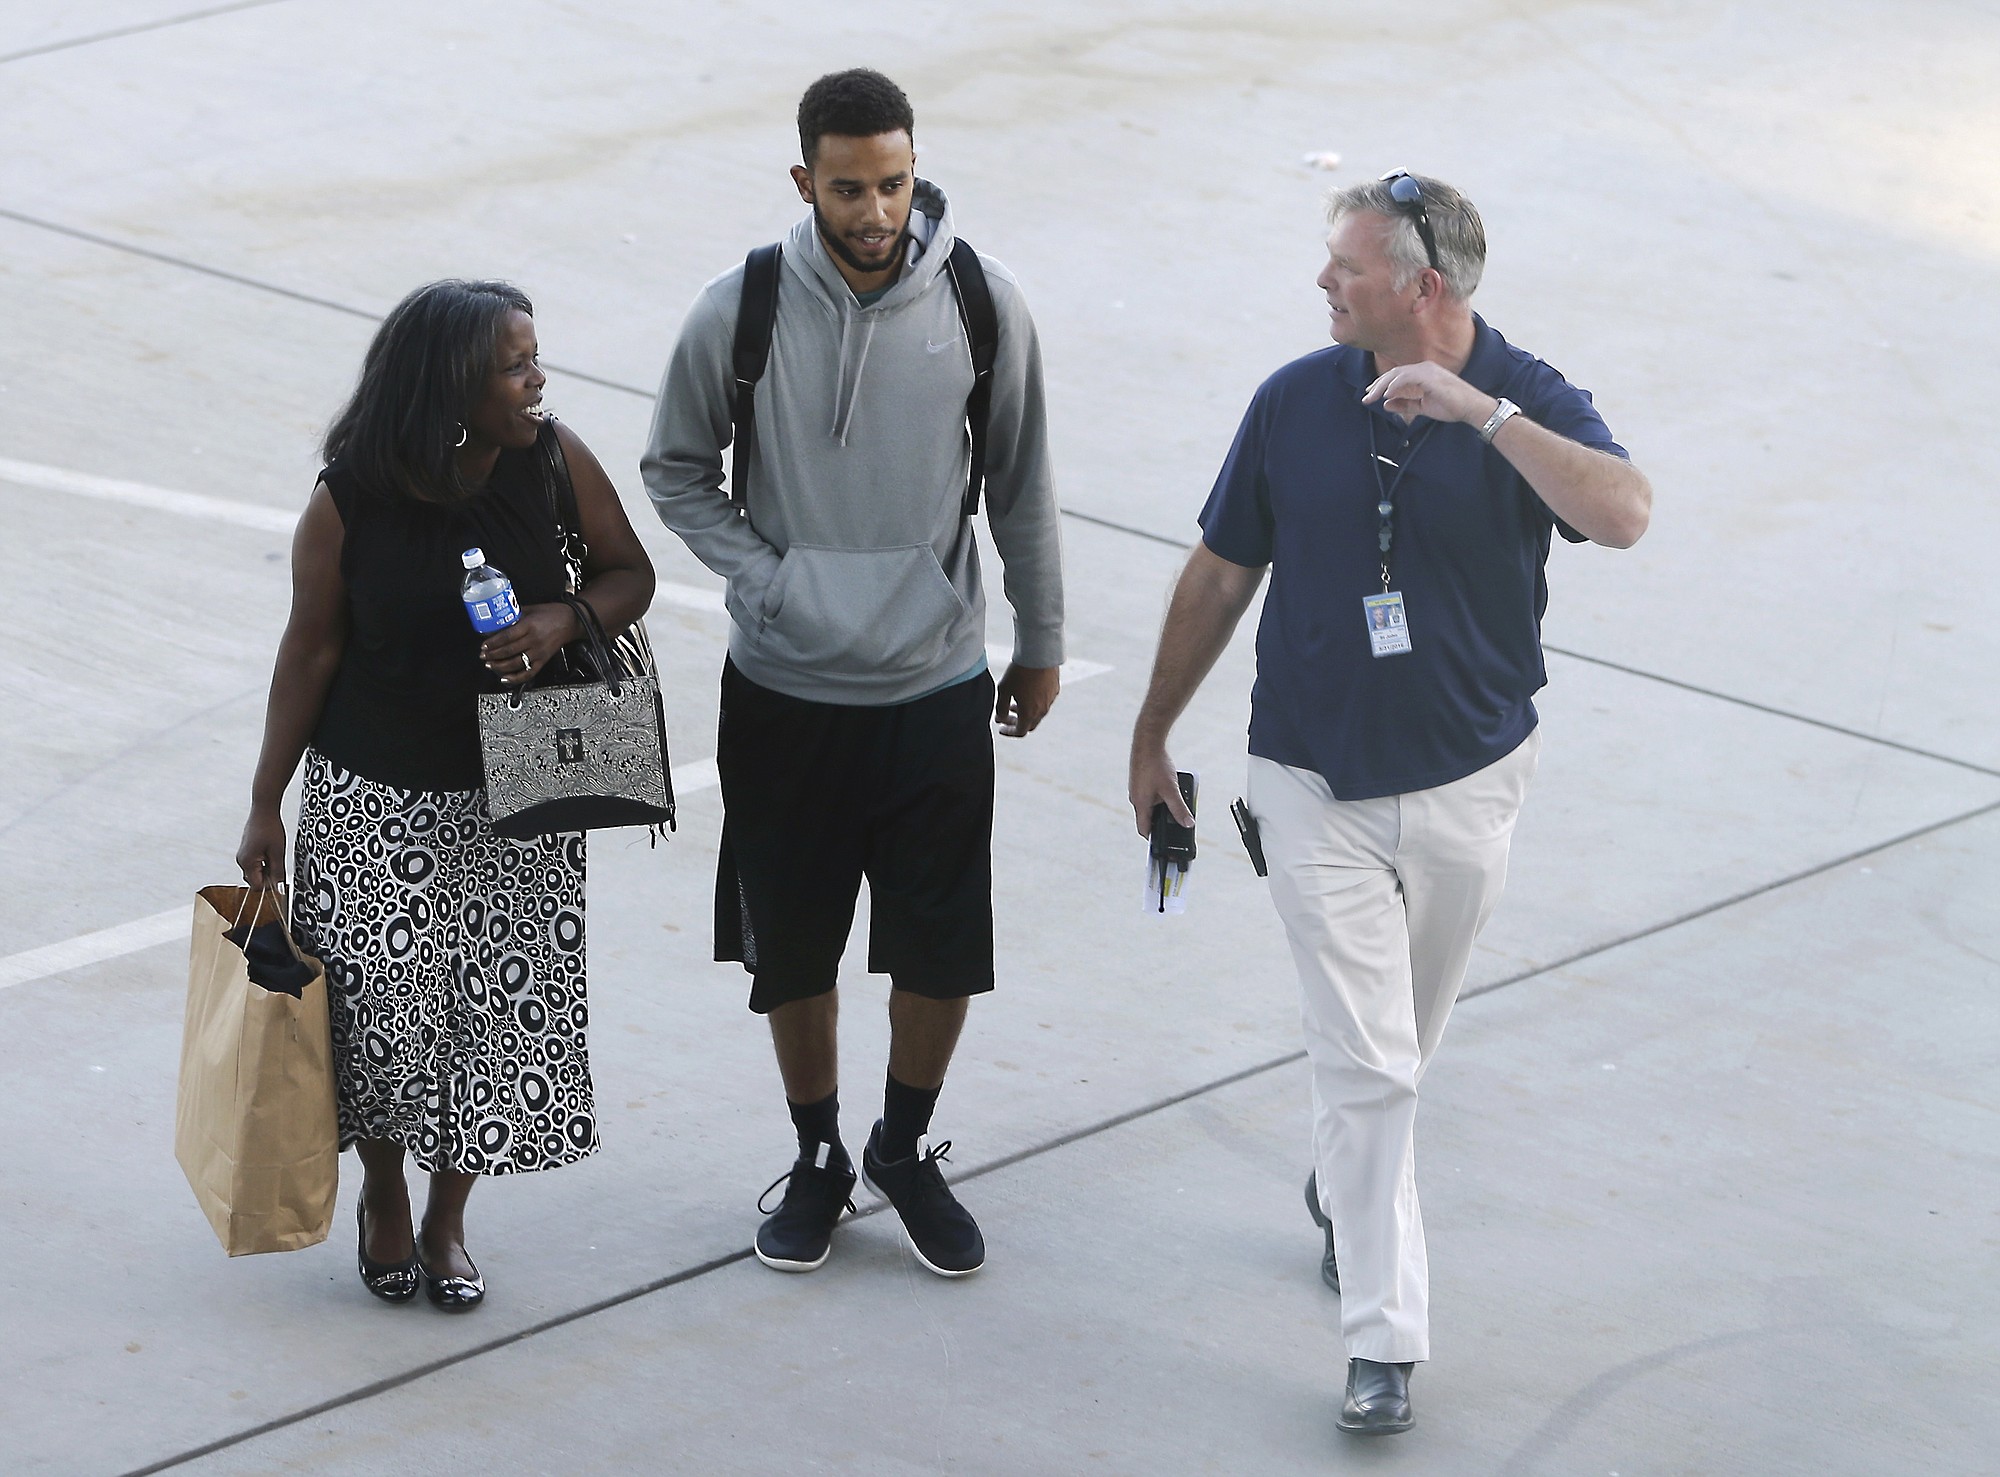 Anthony Sadler, center, who helped stop a terror attack on a train traveling from Amsterdam to Paris, walks to a waiting vehicle Tuesday at Sacramento International Airport in Sacramento, Calif.